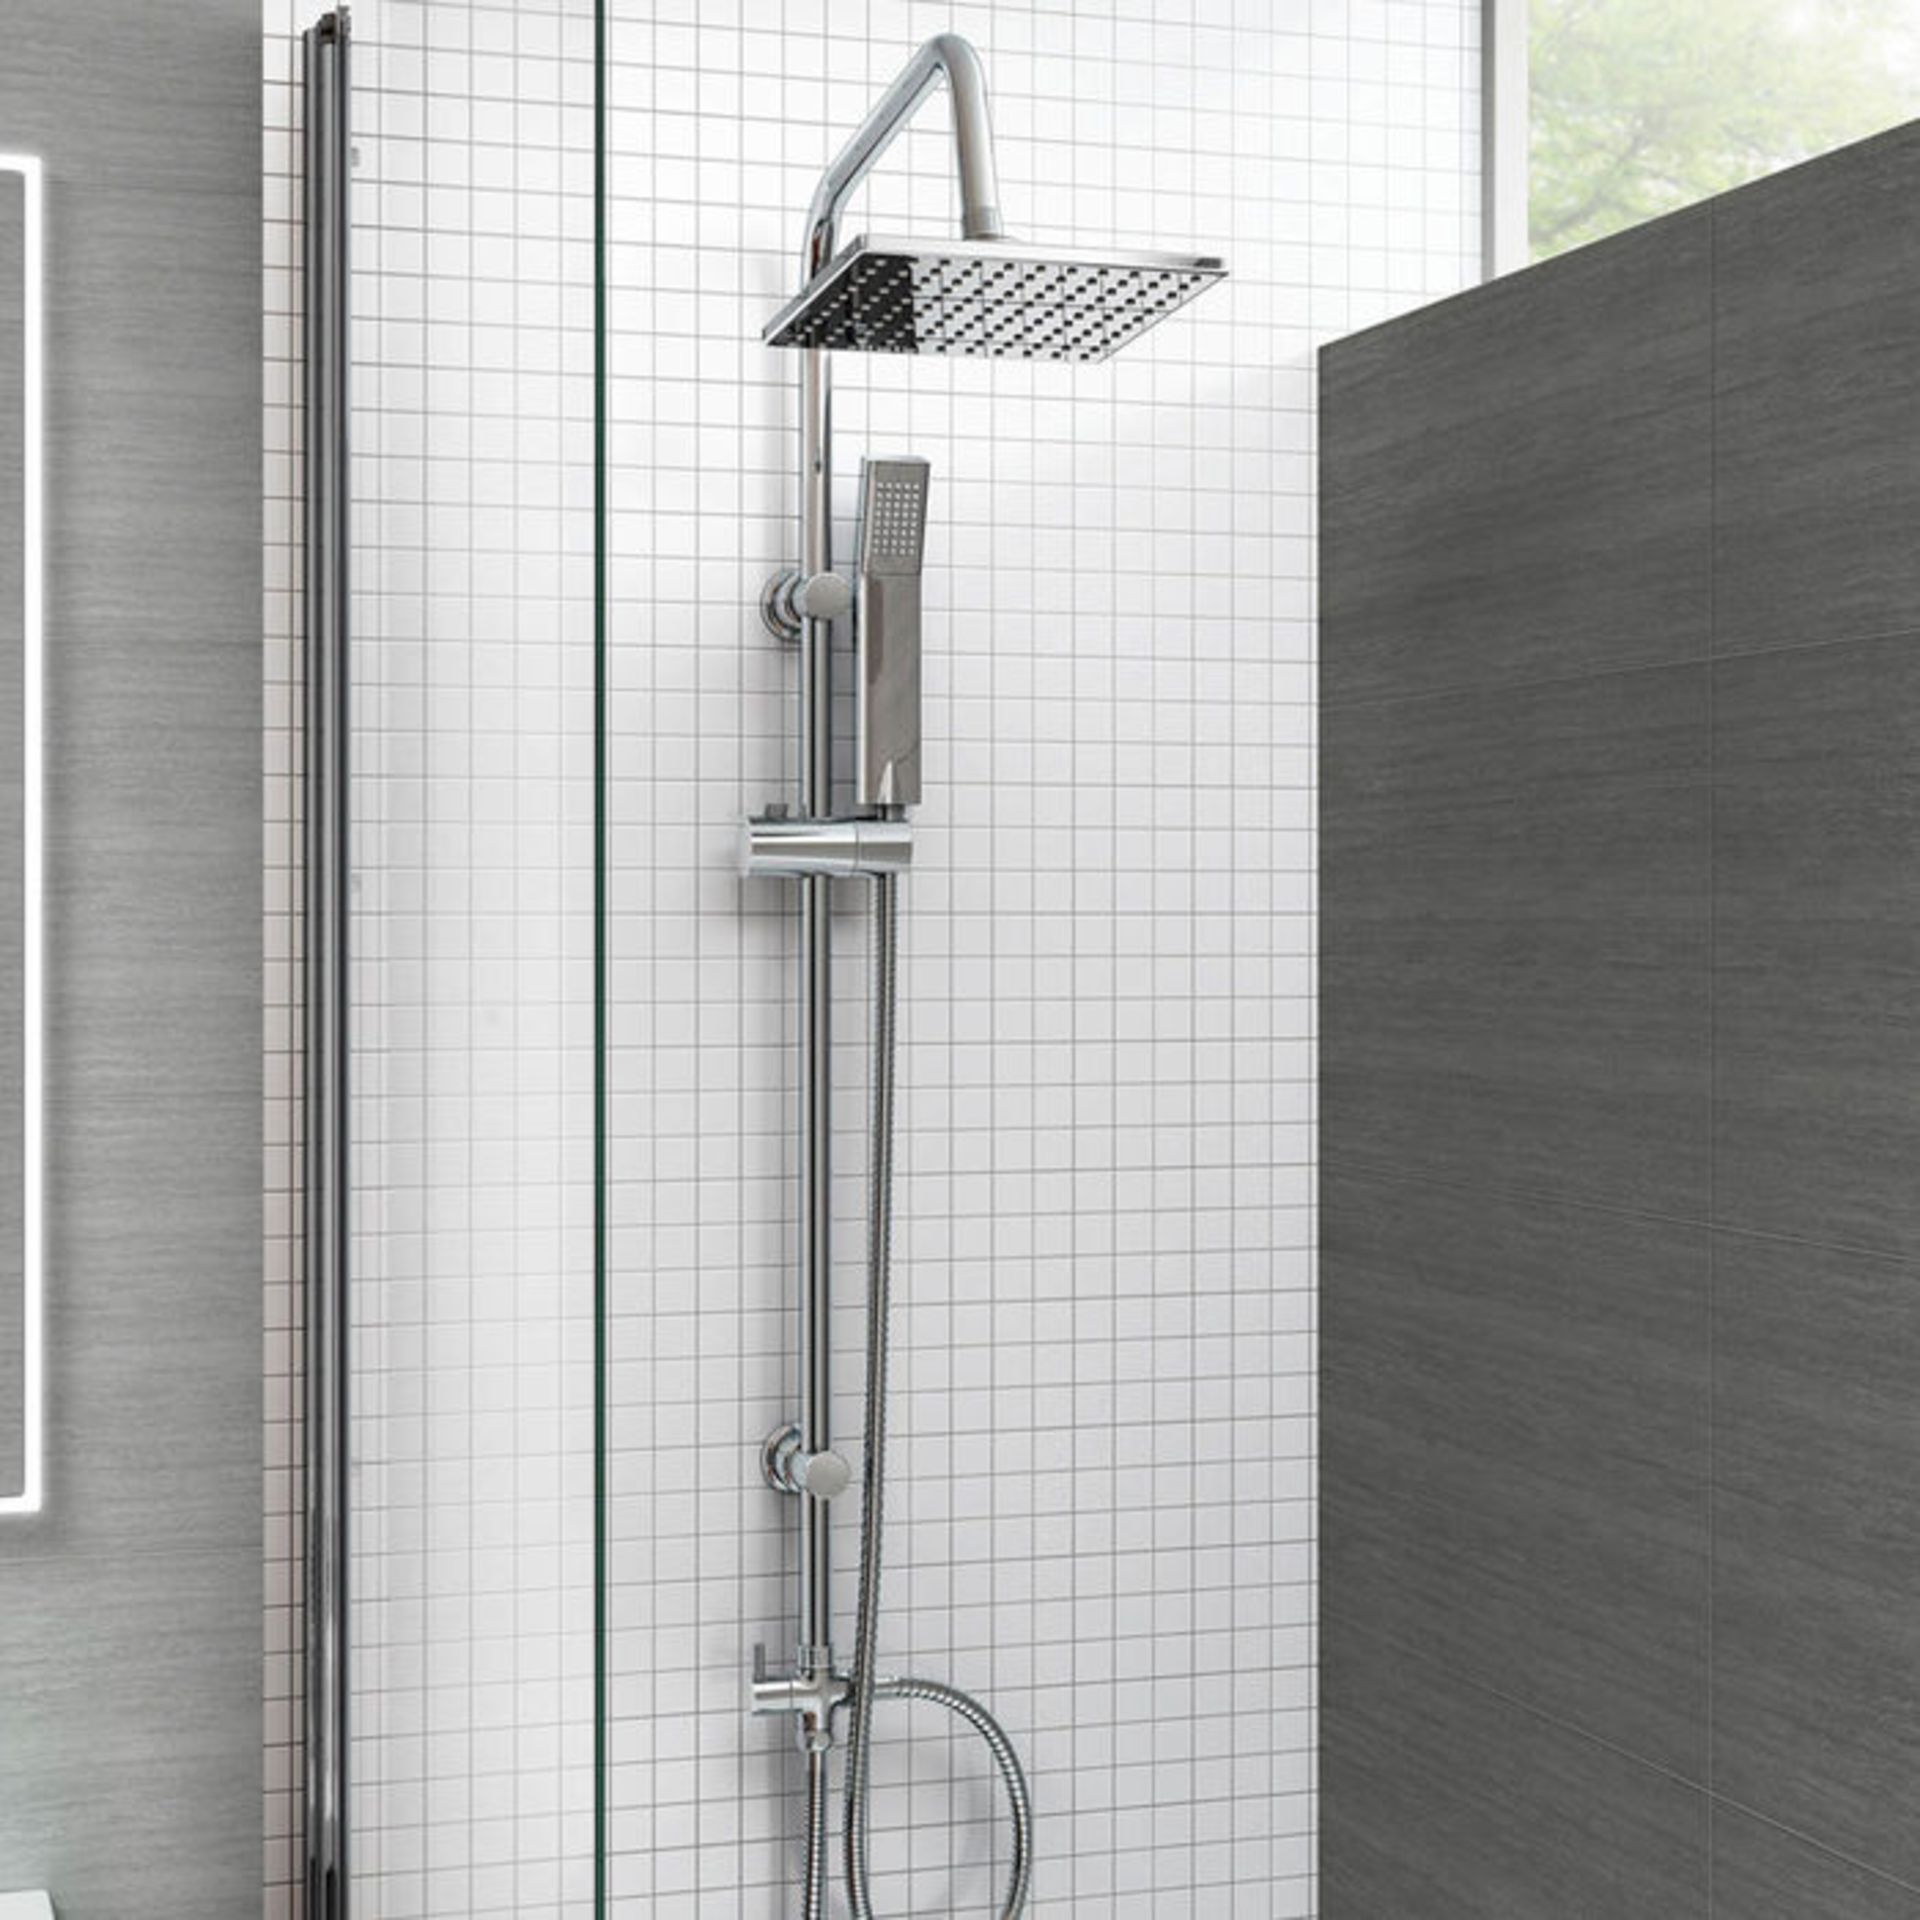 (AH100) 200mm Square Head, Riser Rail & Handheld Kit. Quality stainless steel shower head with